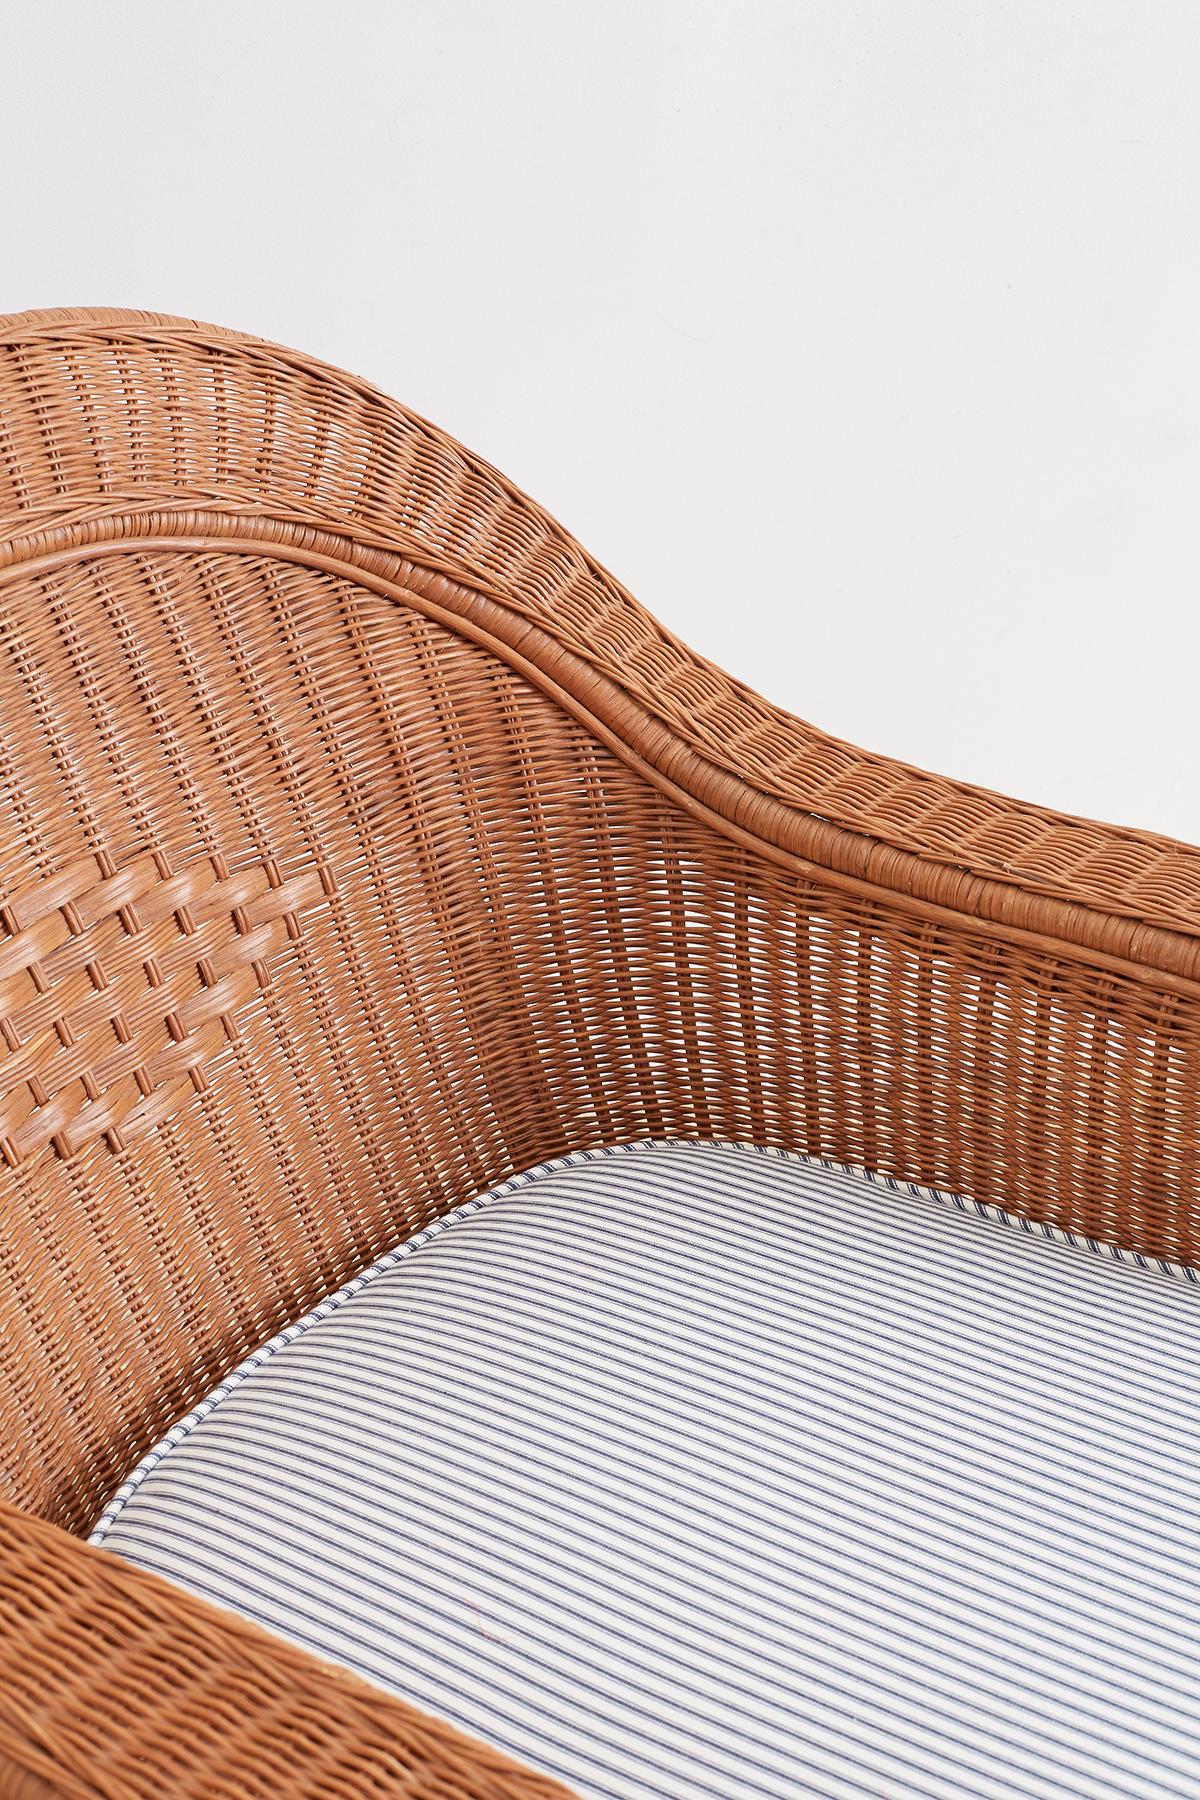 French Style Wicker Chaise Longue with Waverly Ticking Stripe Upholstery 6